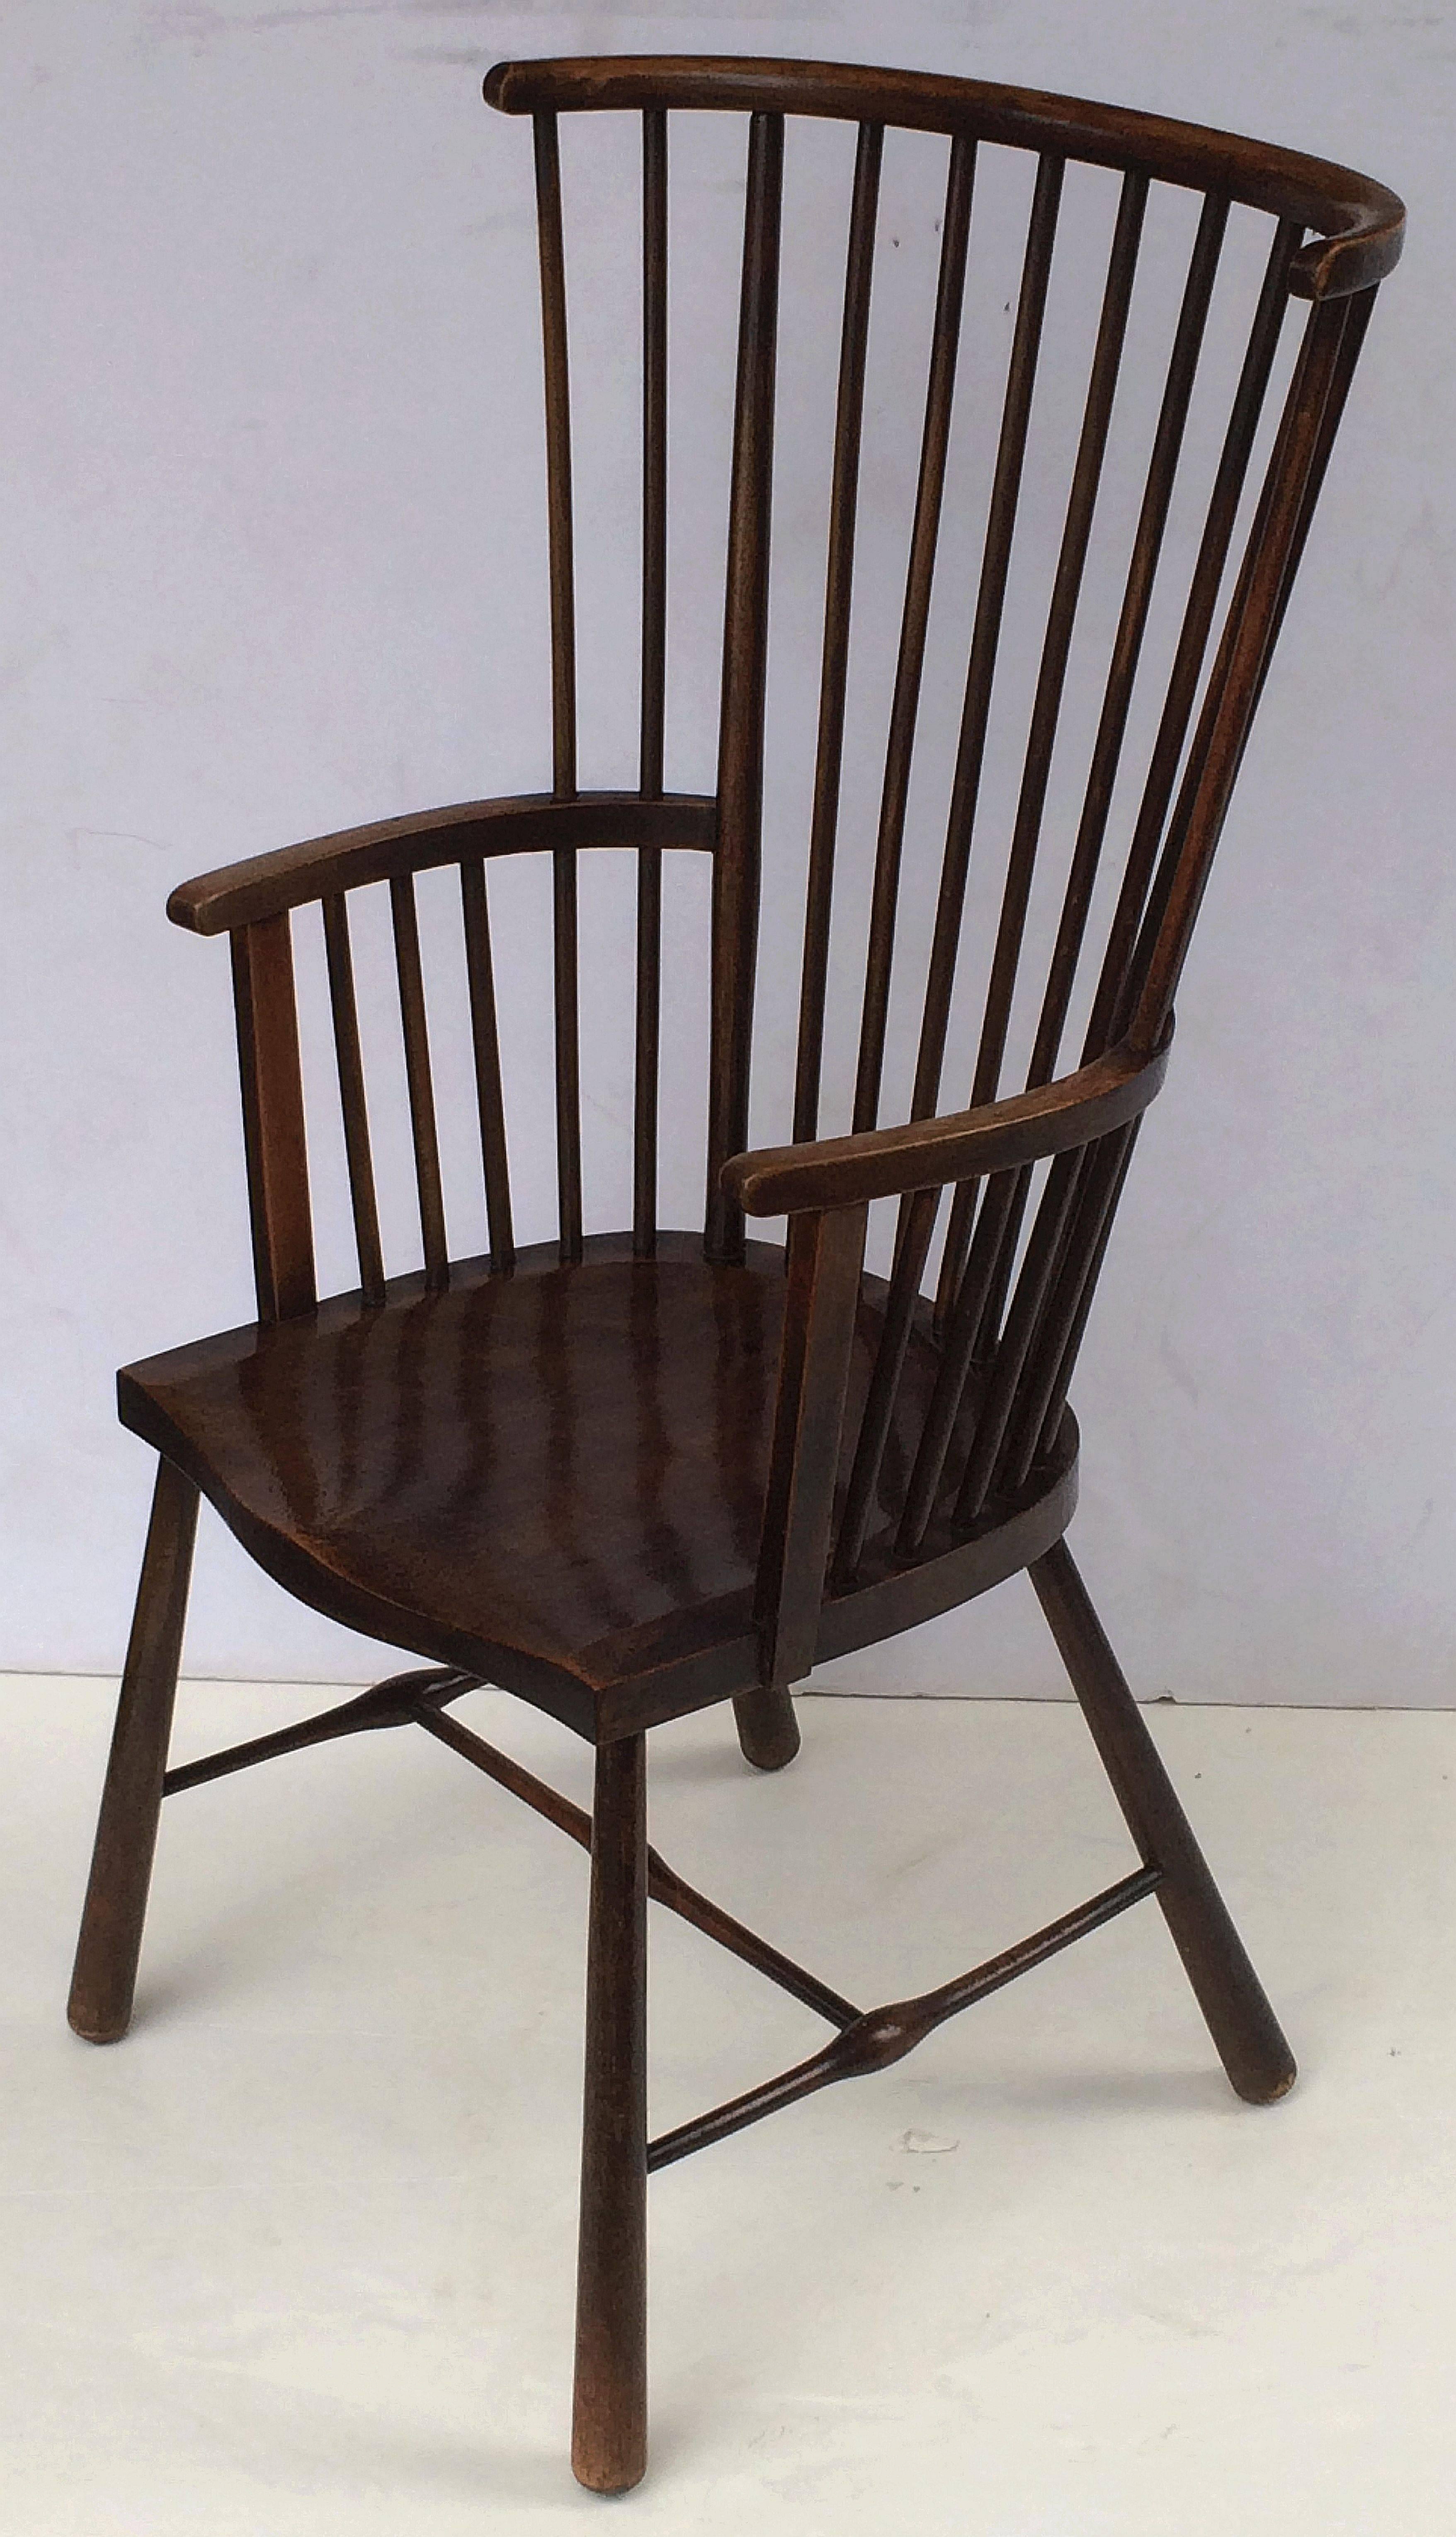 A fine period Windsor armchair (or library chair) from the Arts and Crafts era by the celebrated English design company, Liberty & Co.

With label on underside of seat: Liberty & Co., Regent Street, London